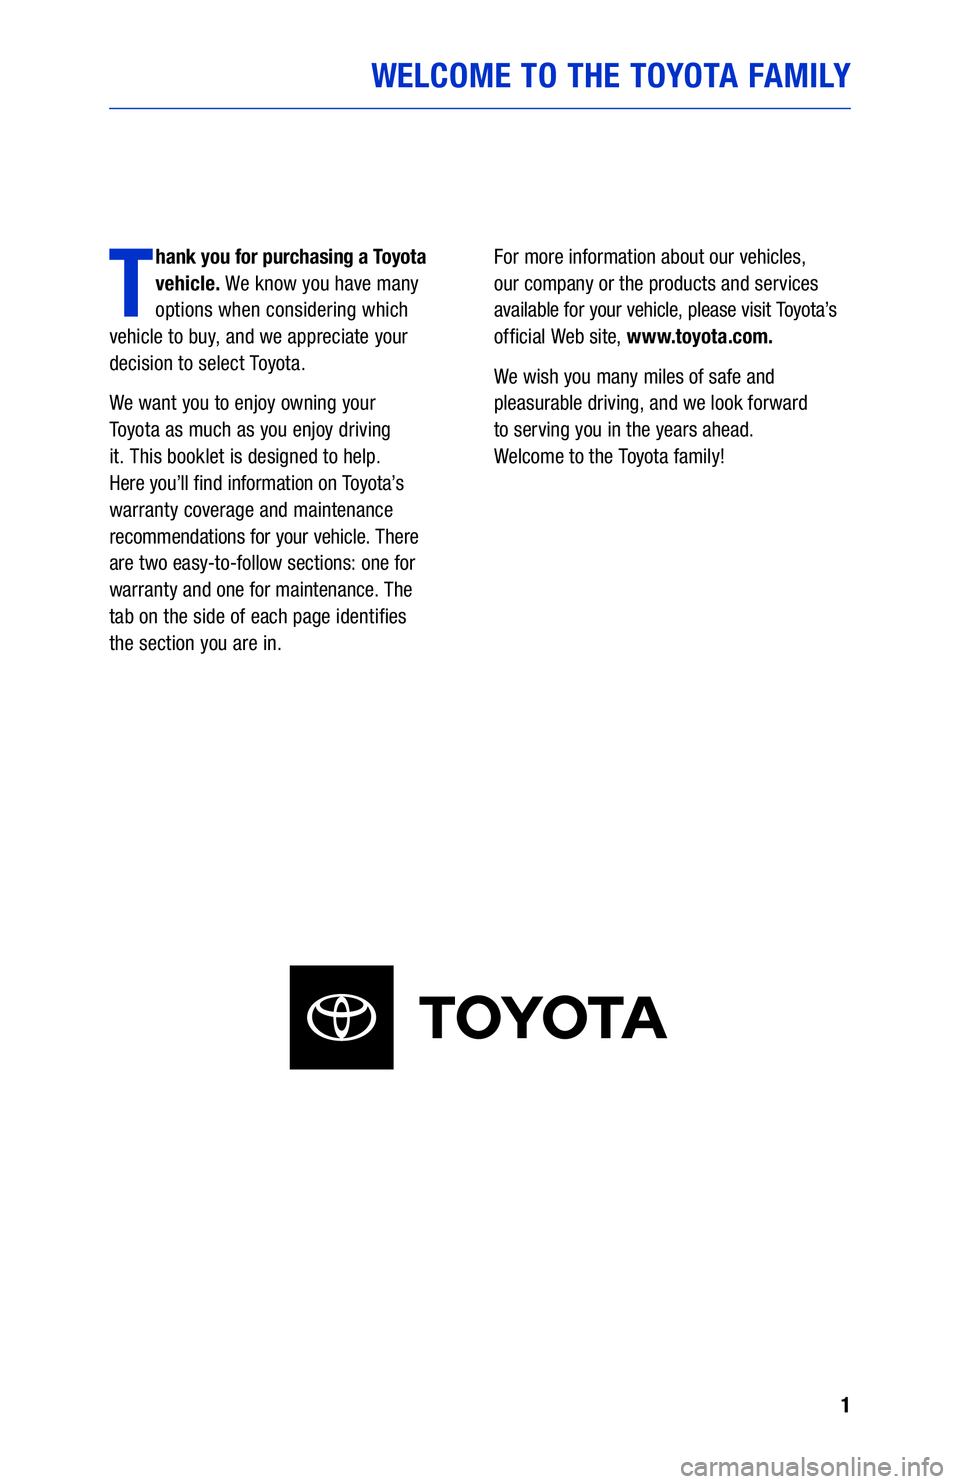 TOYOTA 4RUNNER 2020  Warranties & Maintenance Guides (in English) 1
WELCOME TO THE TOYOTA FAMILY
T
hank you for purchasing a Toyota 
vehicle. We know you have many 
options when considering which   
vehicle to buy, and we appreciate your 
decision to select Toyota.
